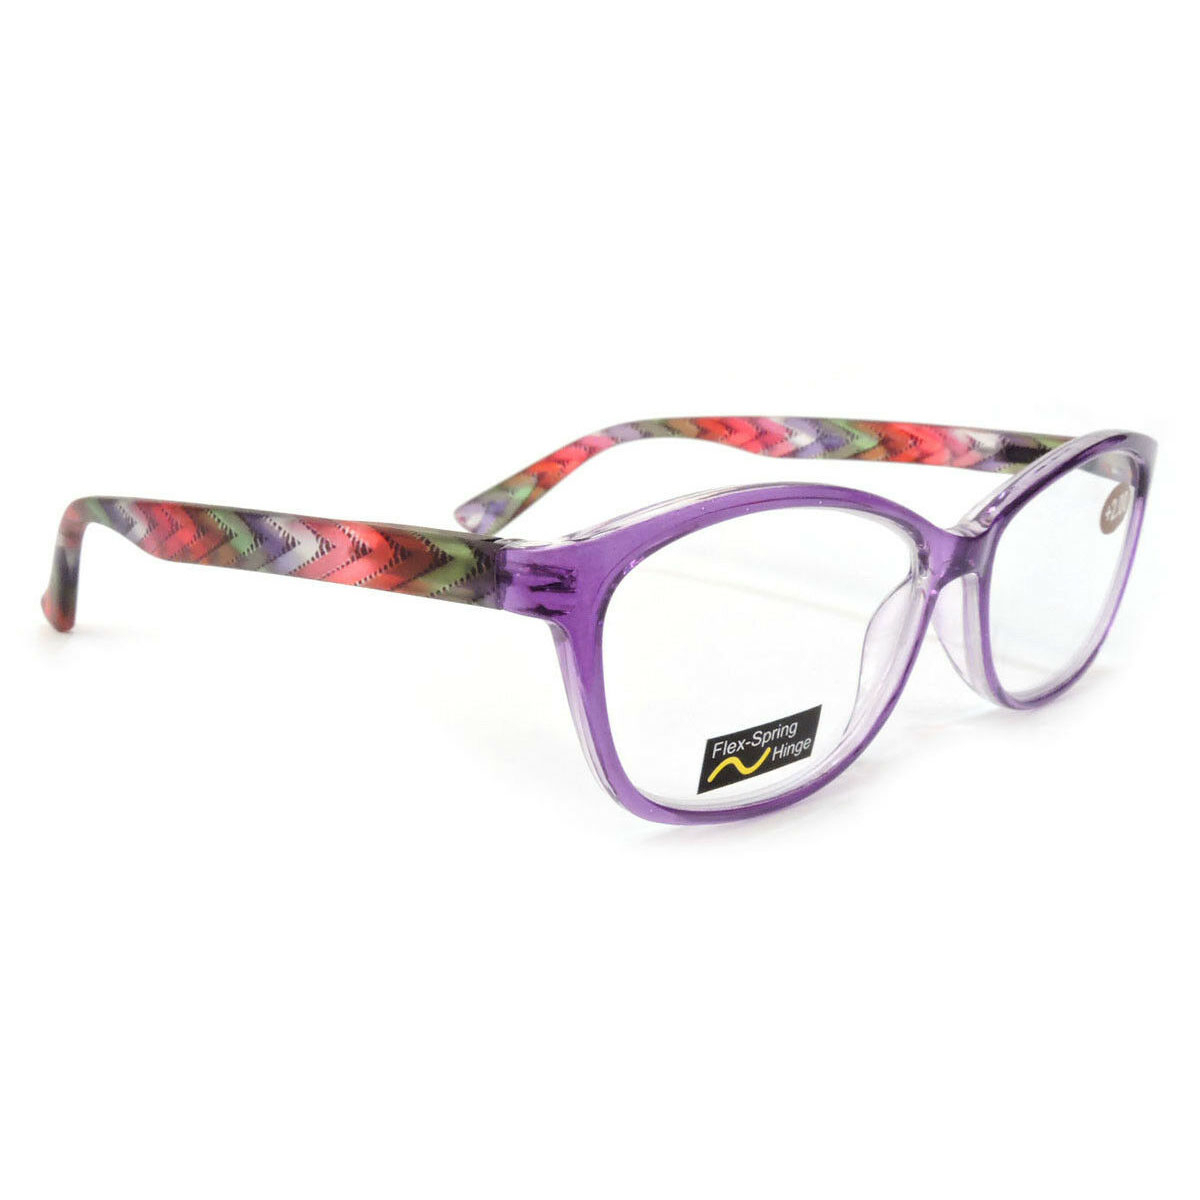 Classic Frame Reading Glasses Colorful Arms Retro Vintage Style - Purple, +2.75